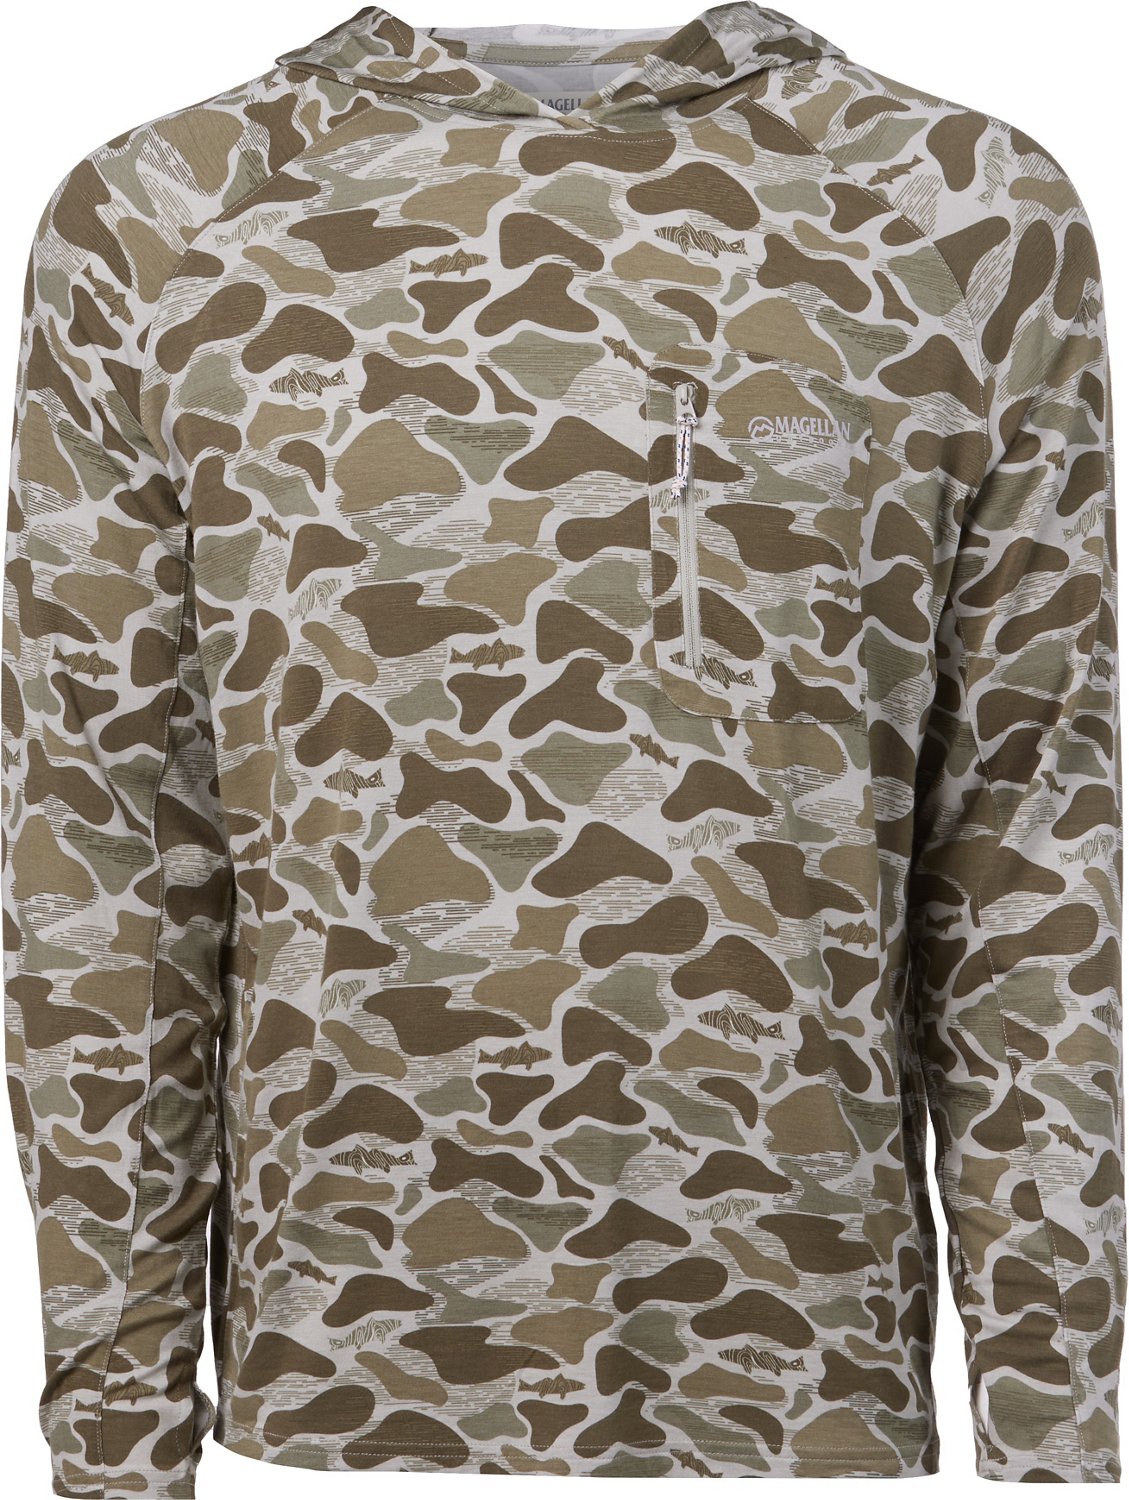 Academy Sports + Outdoors Magellan Outdoors Men's Shore and Line Hoodie